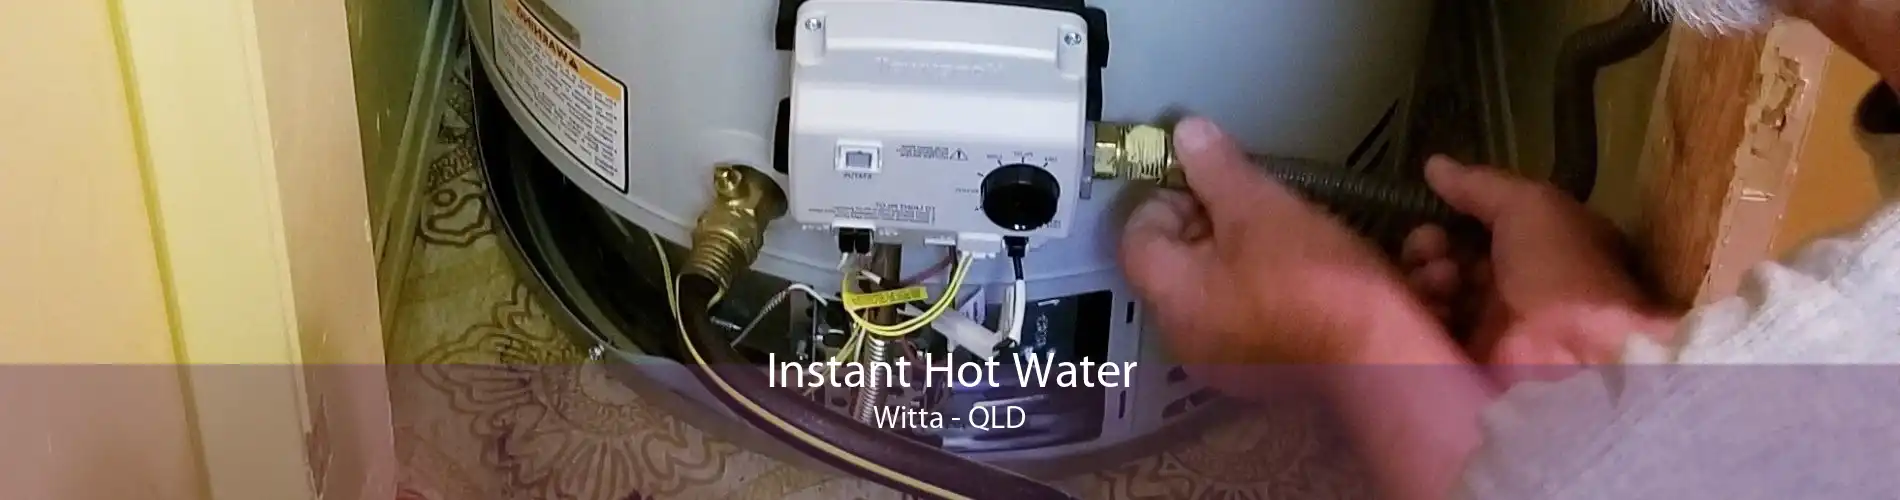 Instant Hot Water Witta - QLD